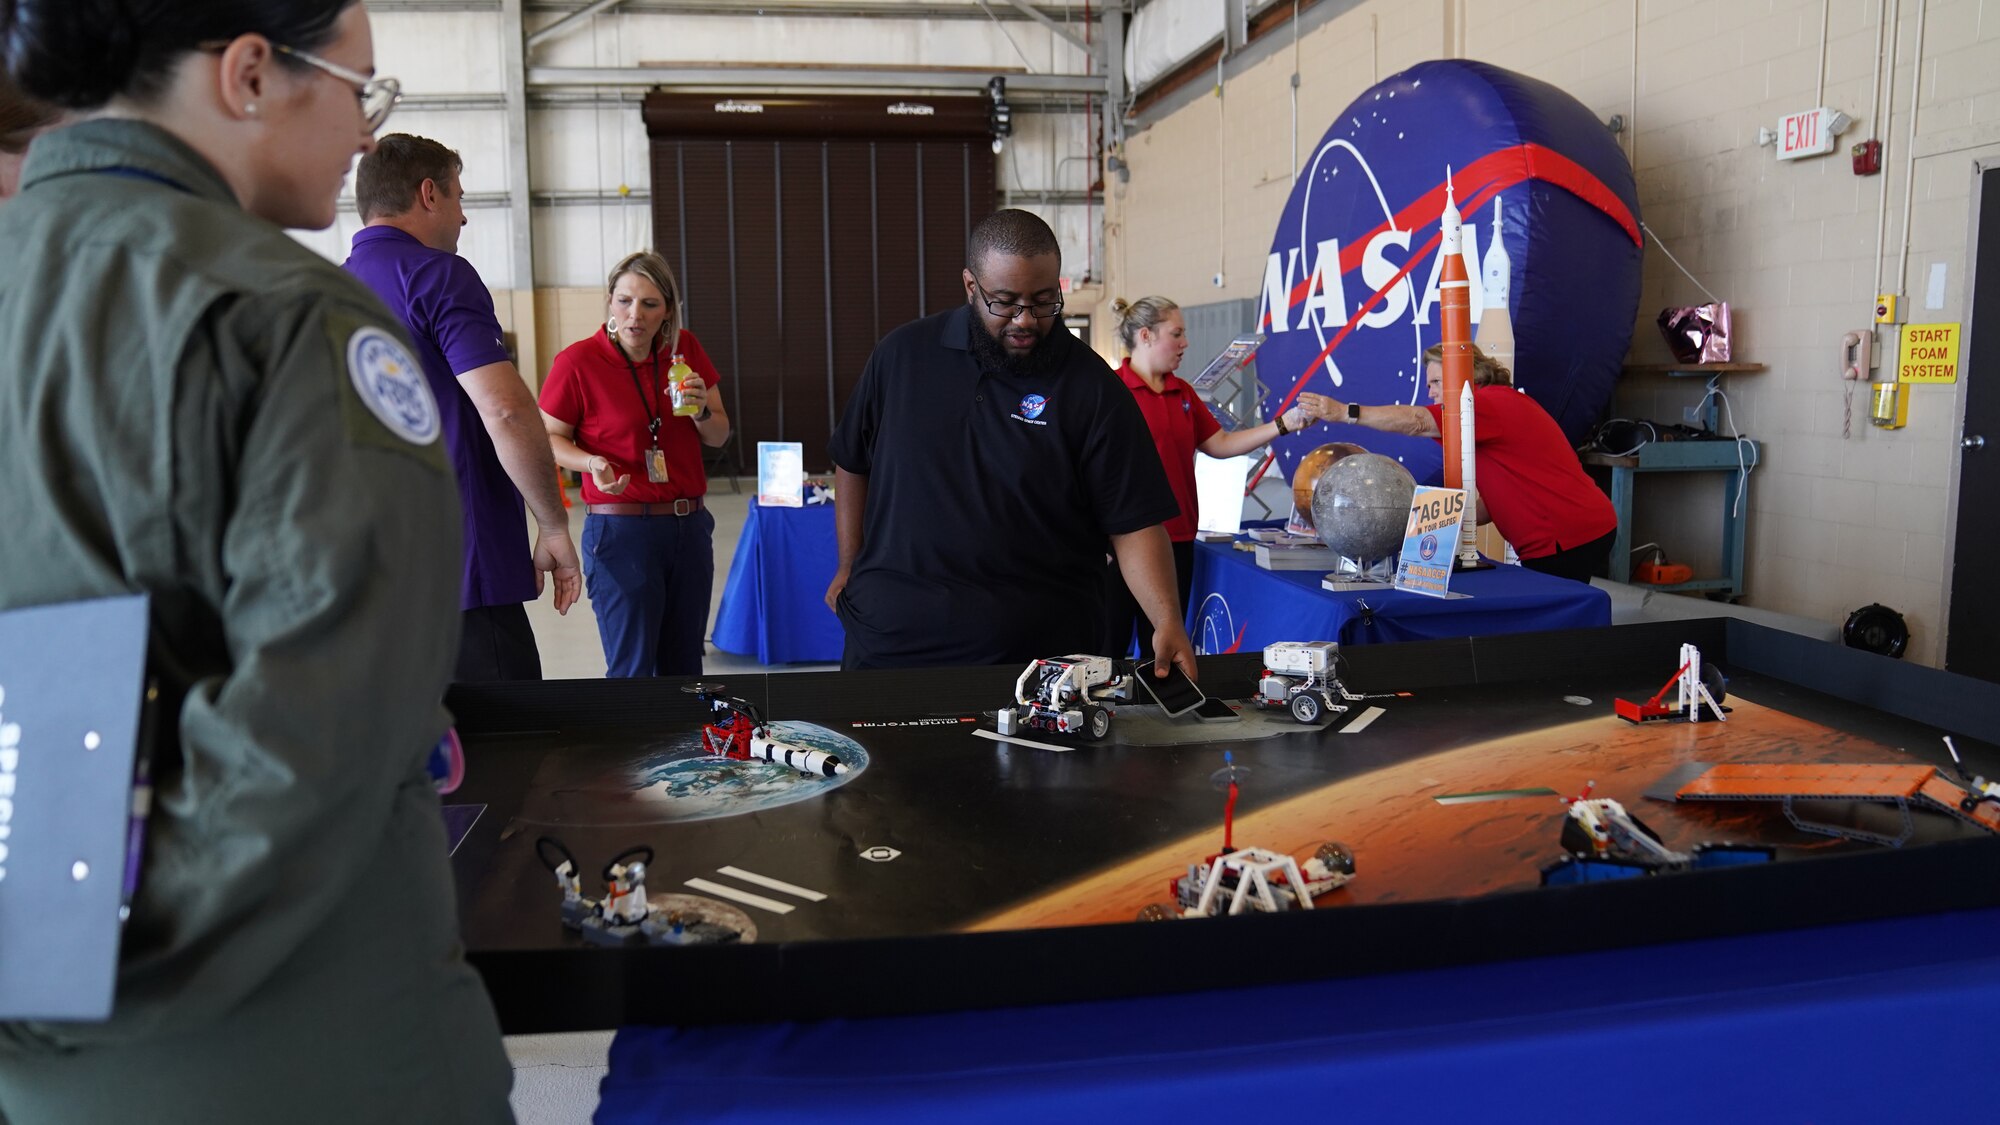 Remote controlled miniature space vehicles are displayed at the NASA table in the STEM Expo at Hangar 4 on Keesler Air Force Base, Mississippi, April 28, 2023. The Science, Technology, Engineering, and Math Expo was an educational opportunity for student to learn about career opportunities in the Air Force and on the Gulf Coast. (U.S. Air Force photo by Airman 1st Class Elizabeth Davis)